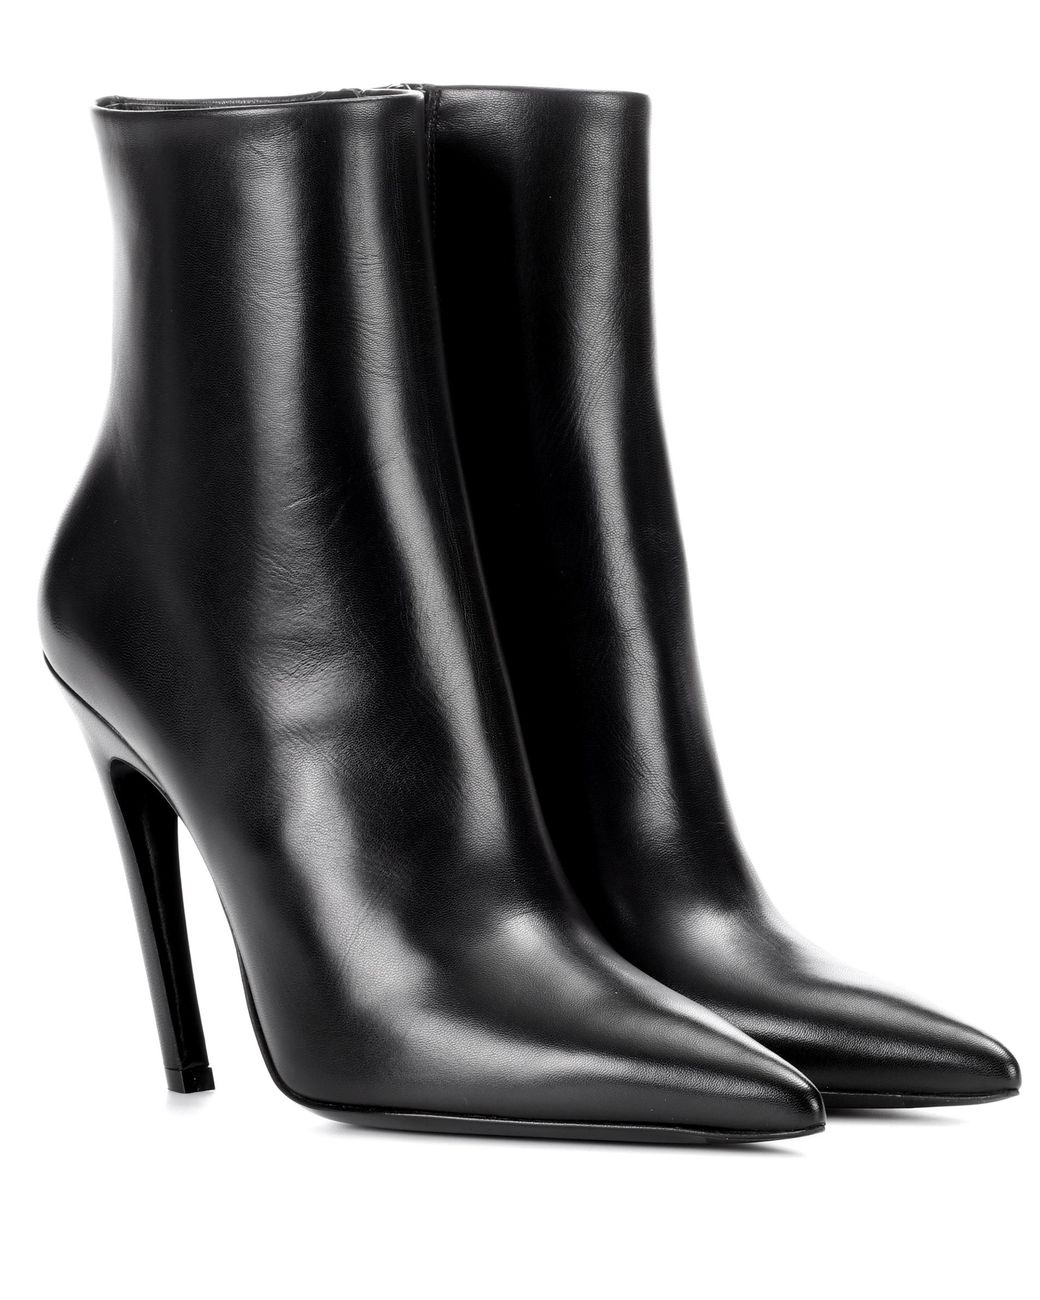 Balenciaga Knife Leather Ankle Boots in Black | Lyst